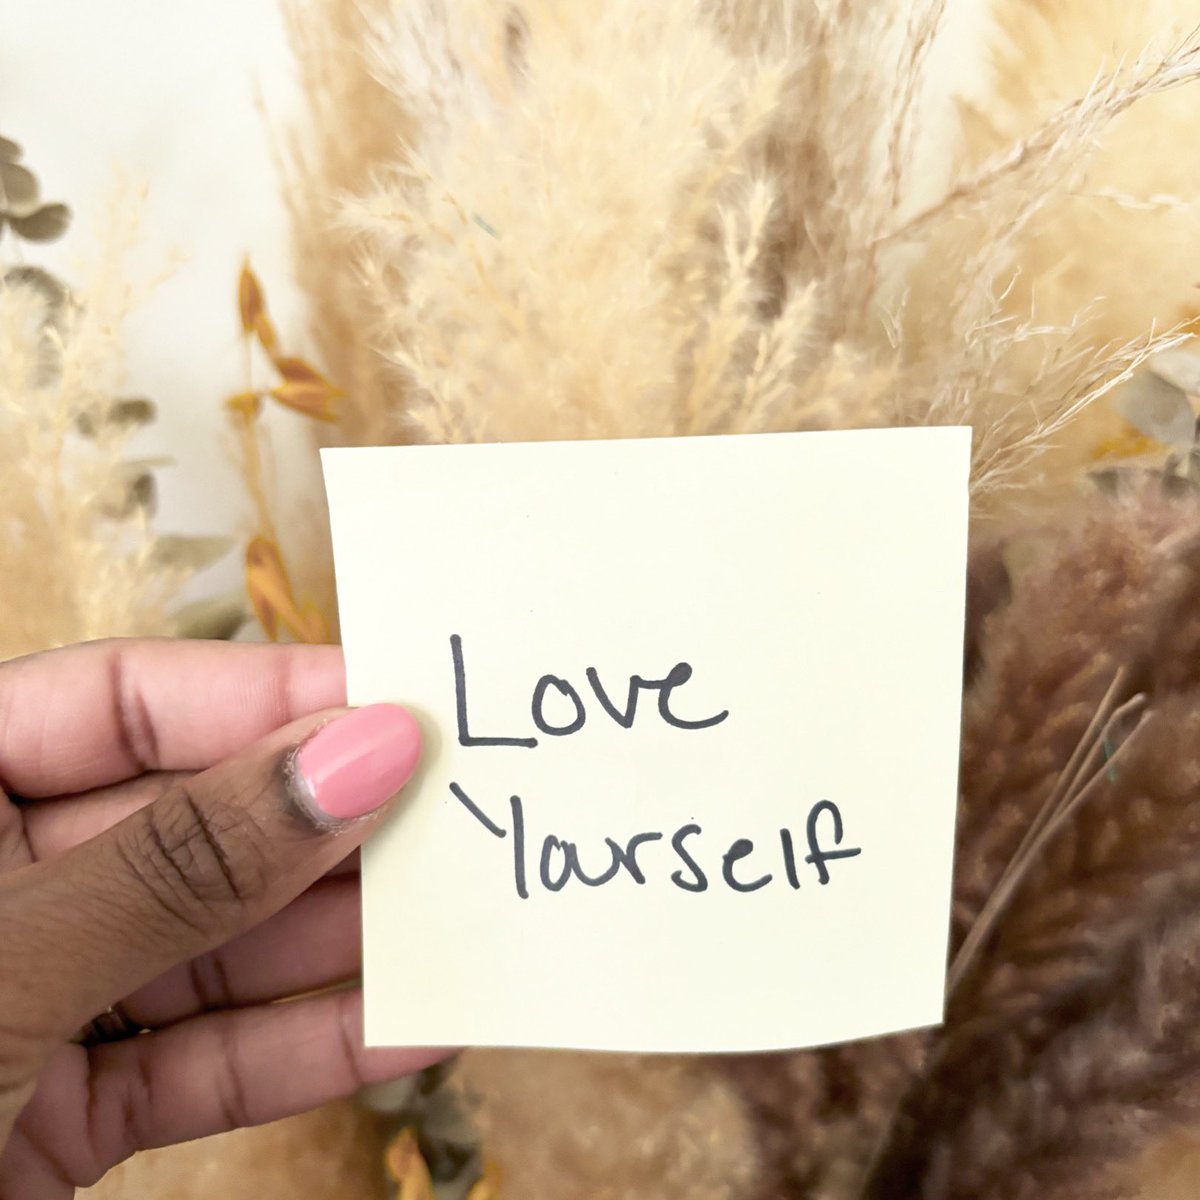 💕Self-love is a habit and the more consistent you are with practicing this habit, the more compassionate you’ll start to become towards yourself. #selflove #mentalhealththerapy #memphistherapist #therapyisforeveryone #therapistthoughts #cooperyoungmemphis #ferrenfamilycounseling